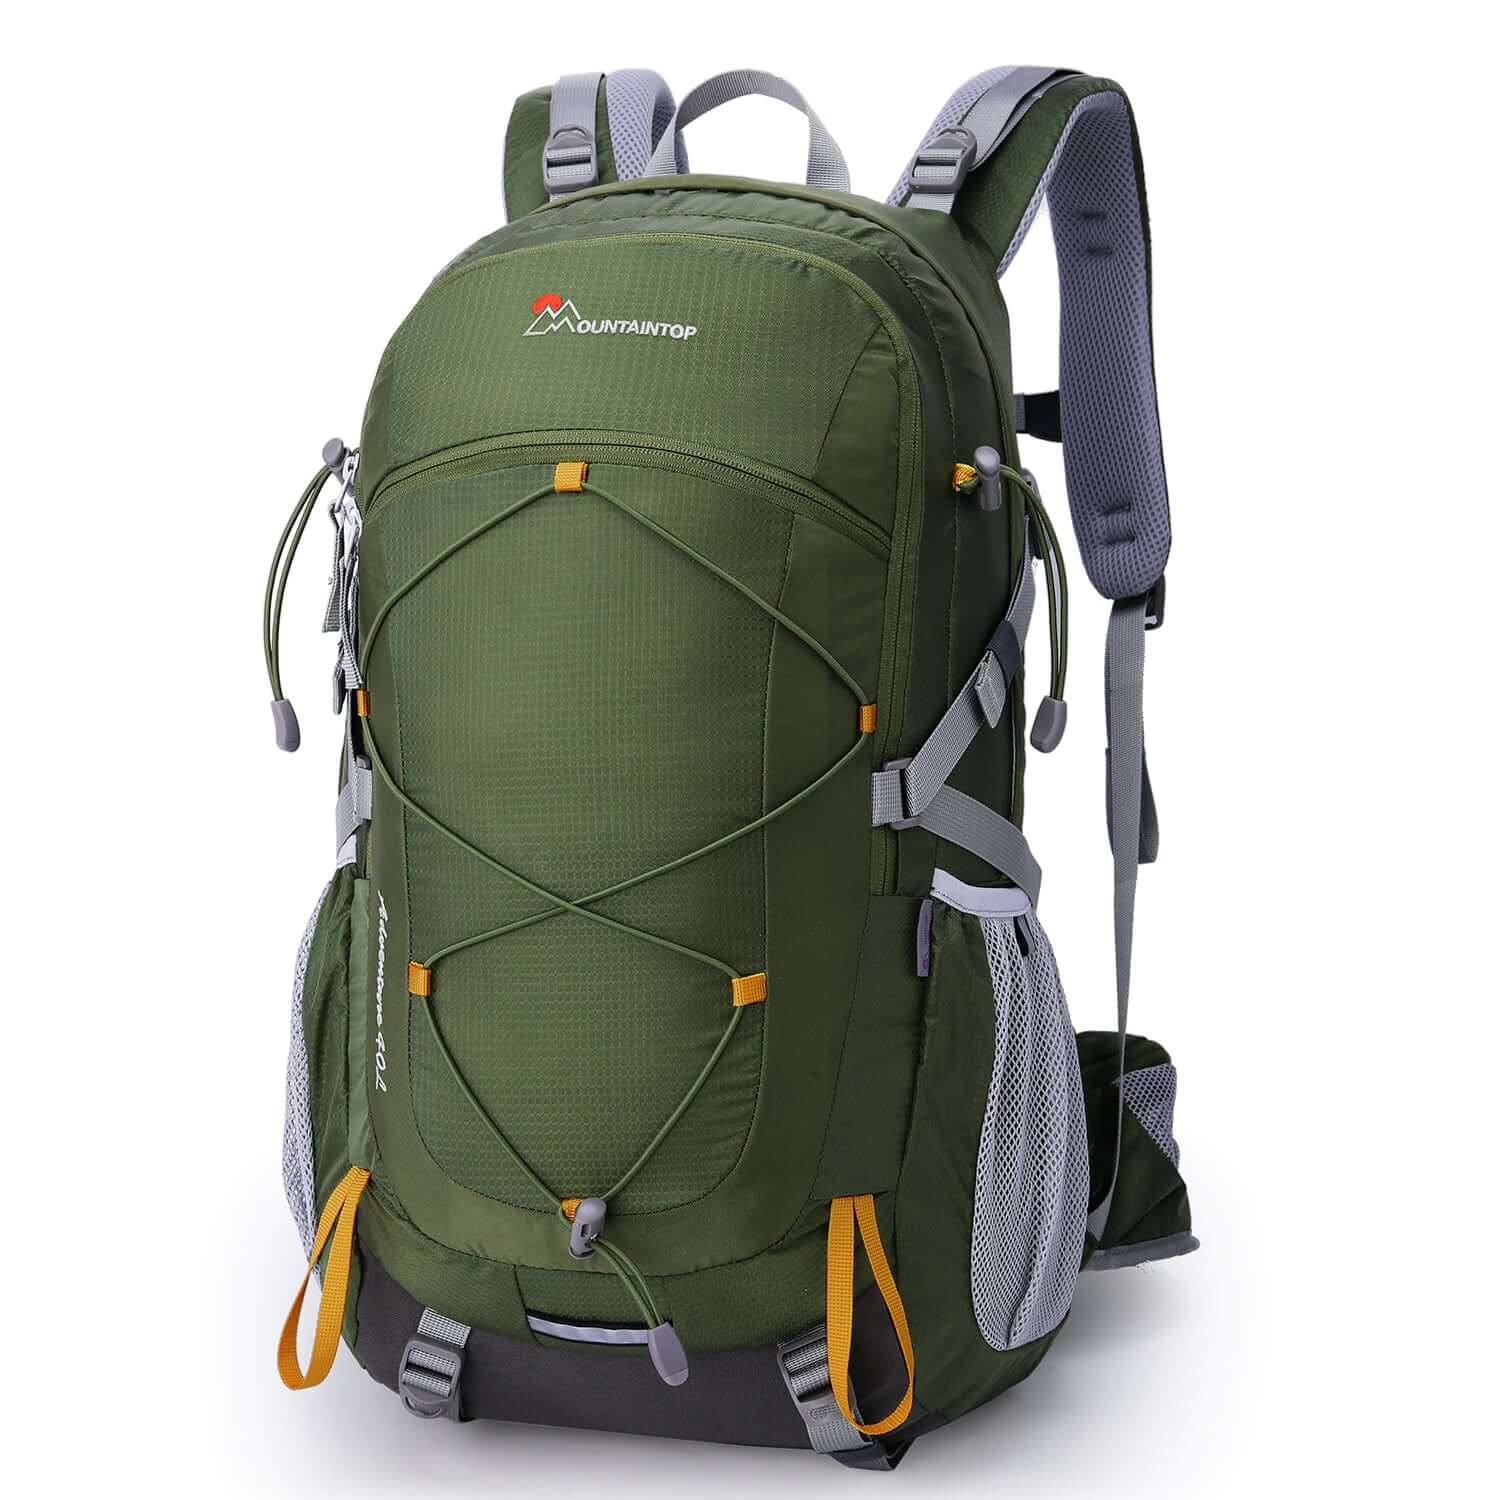 MOUNTAINTOP 40L Hiking Backpack with Rain Cover (M5832)